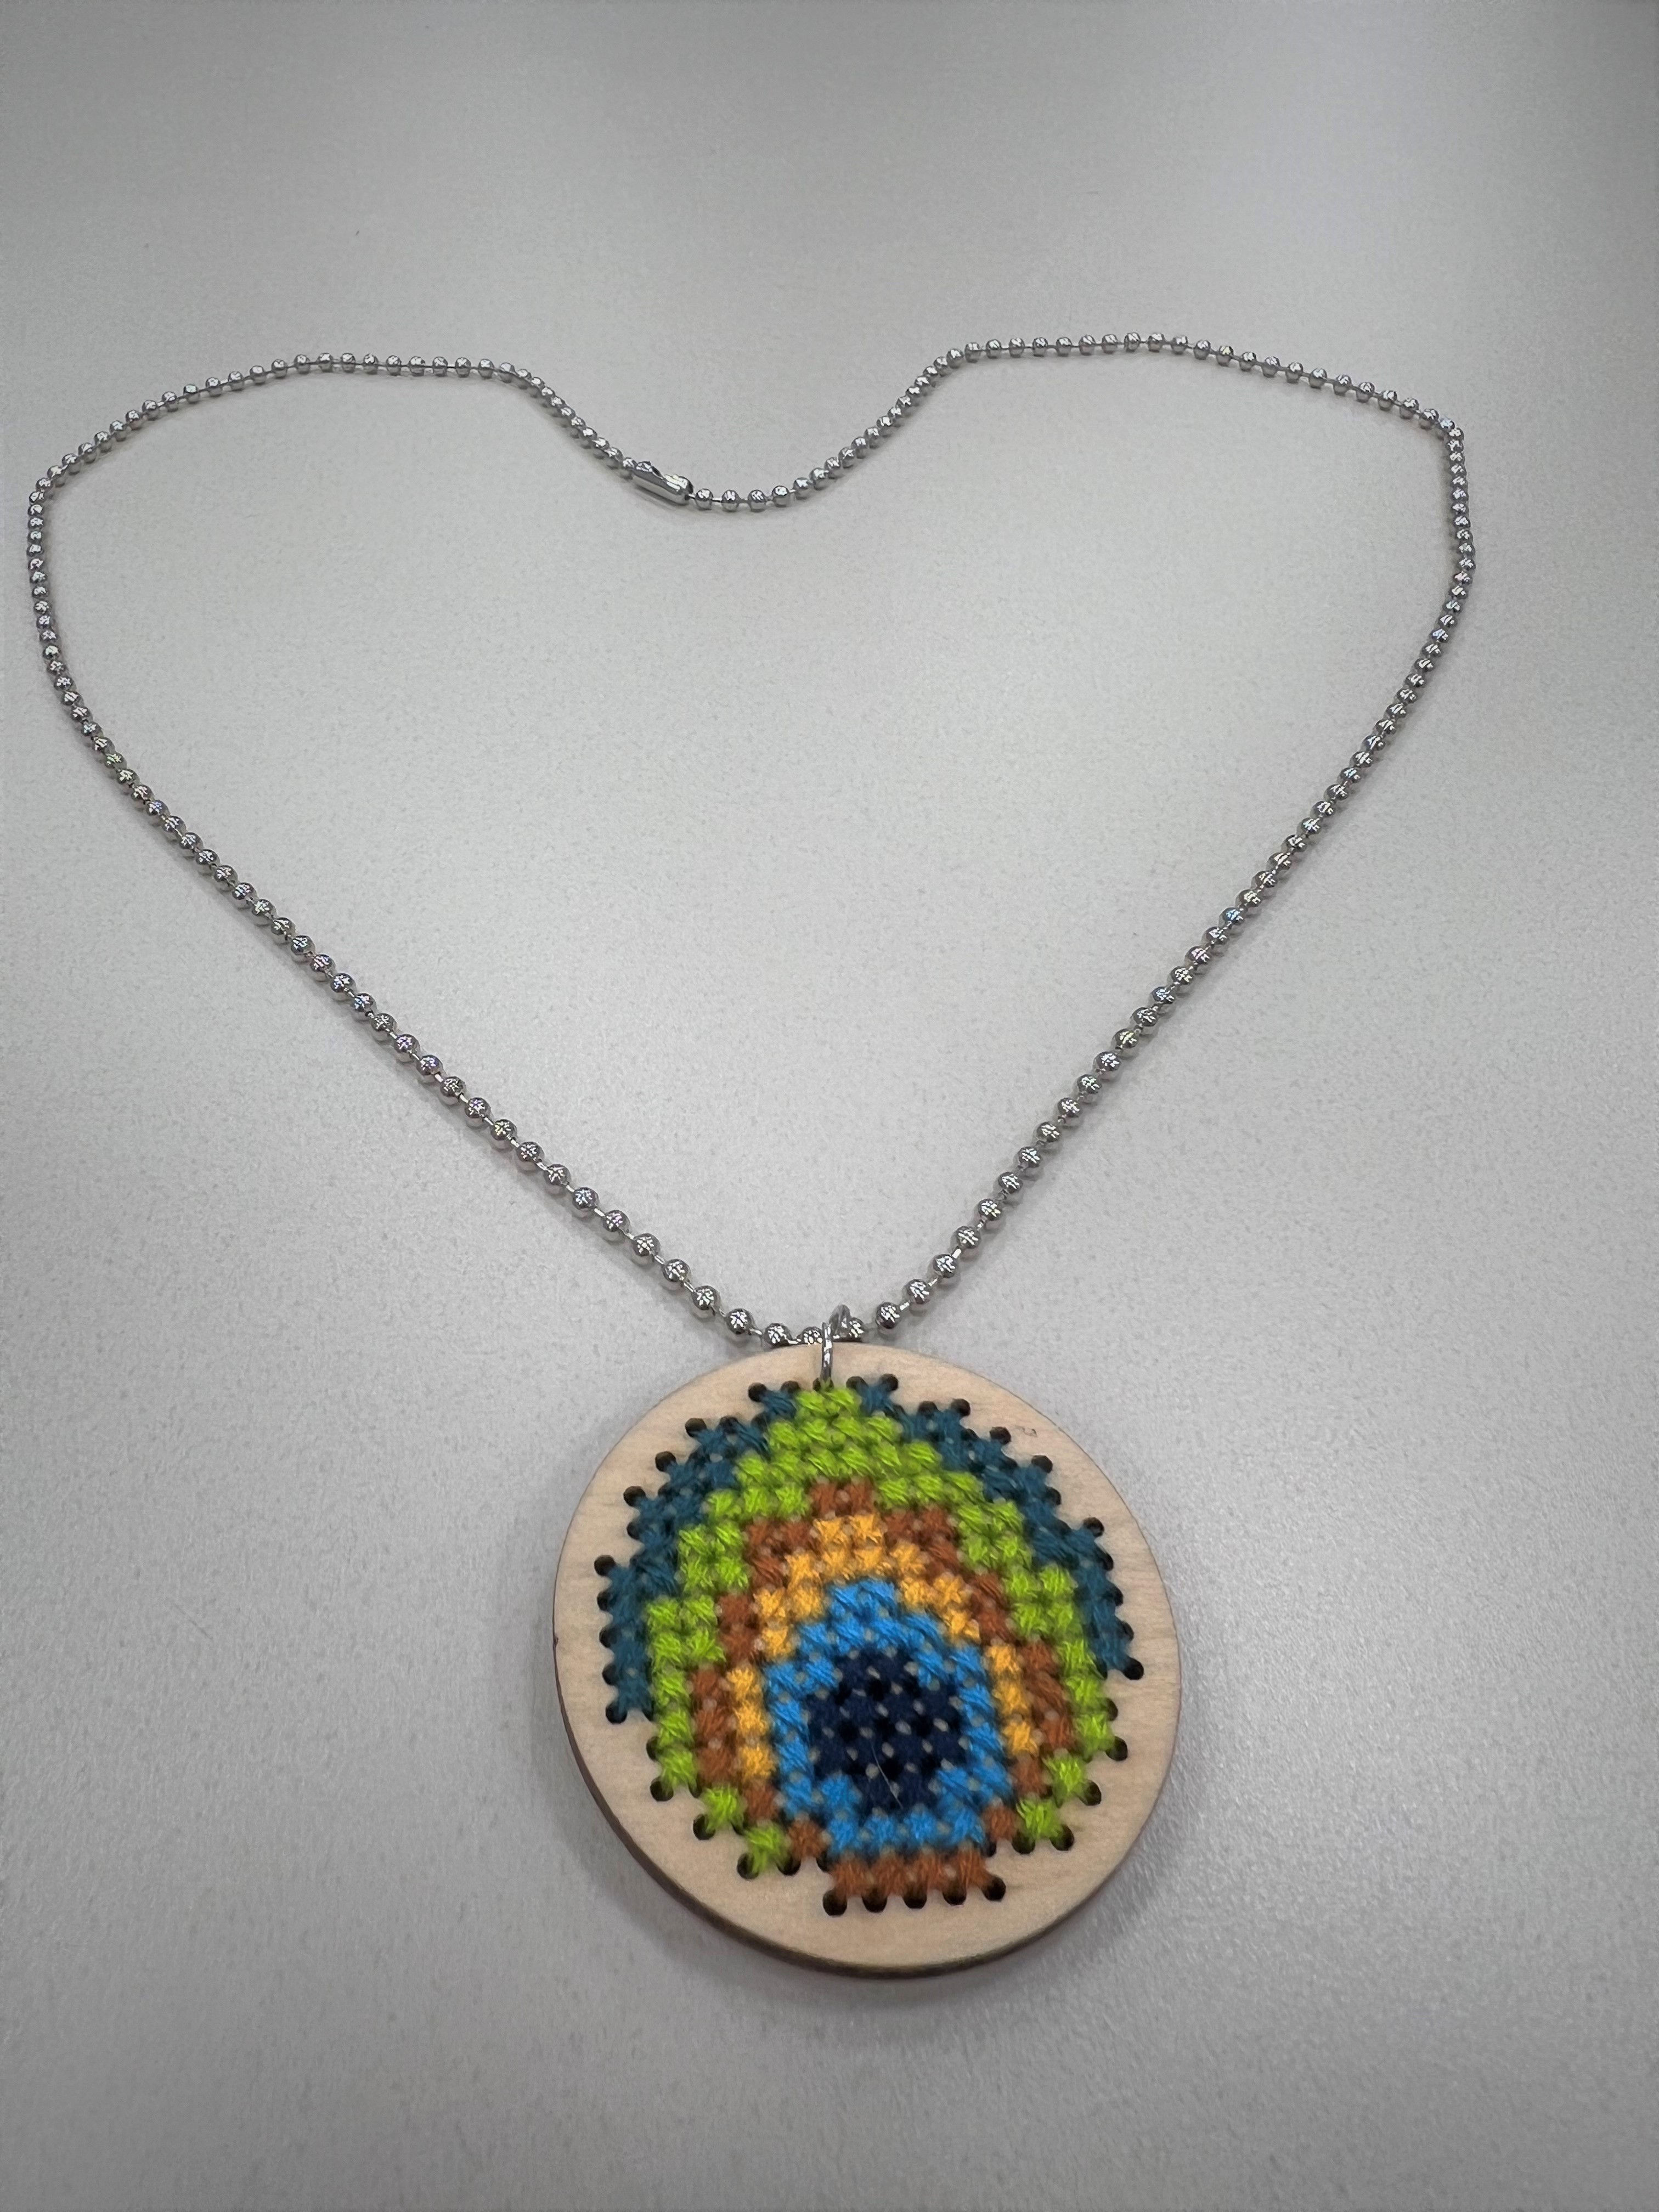 close up of a wooden pendant covered in a cross stitched peacock feather pattern